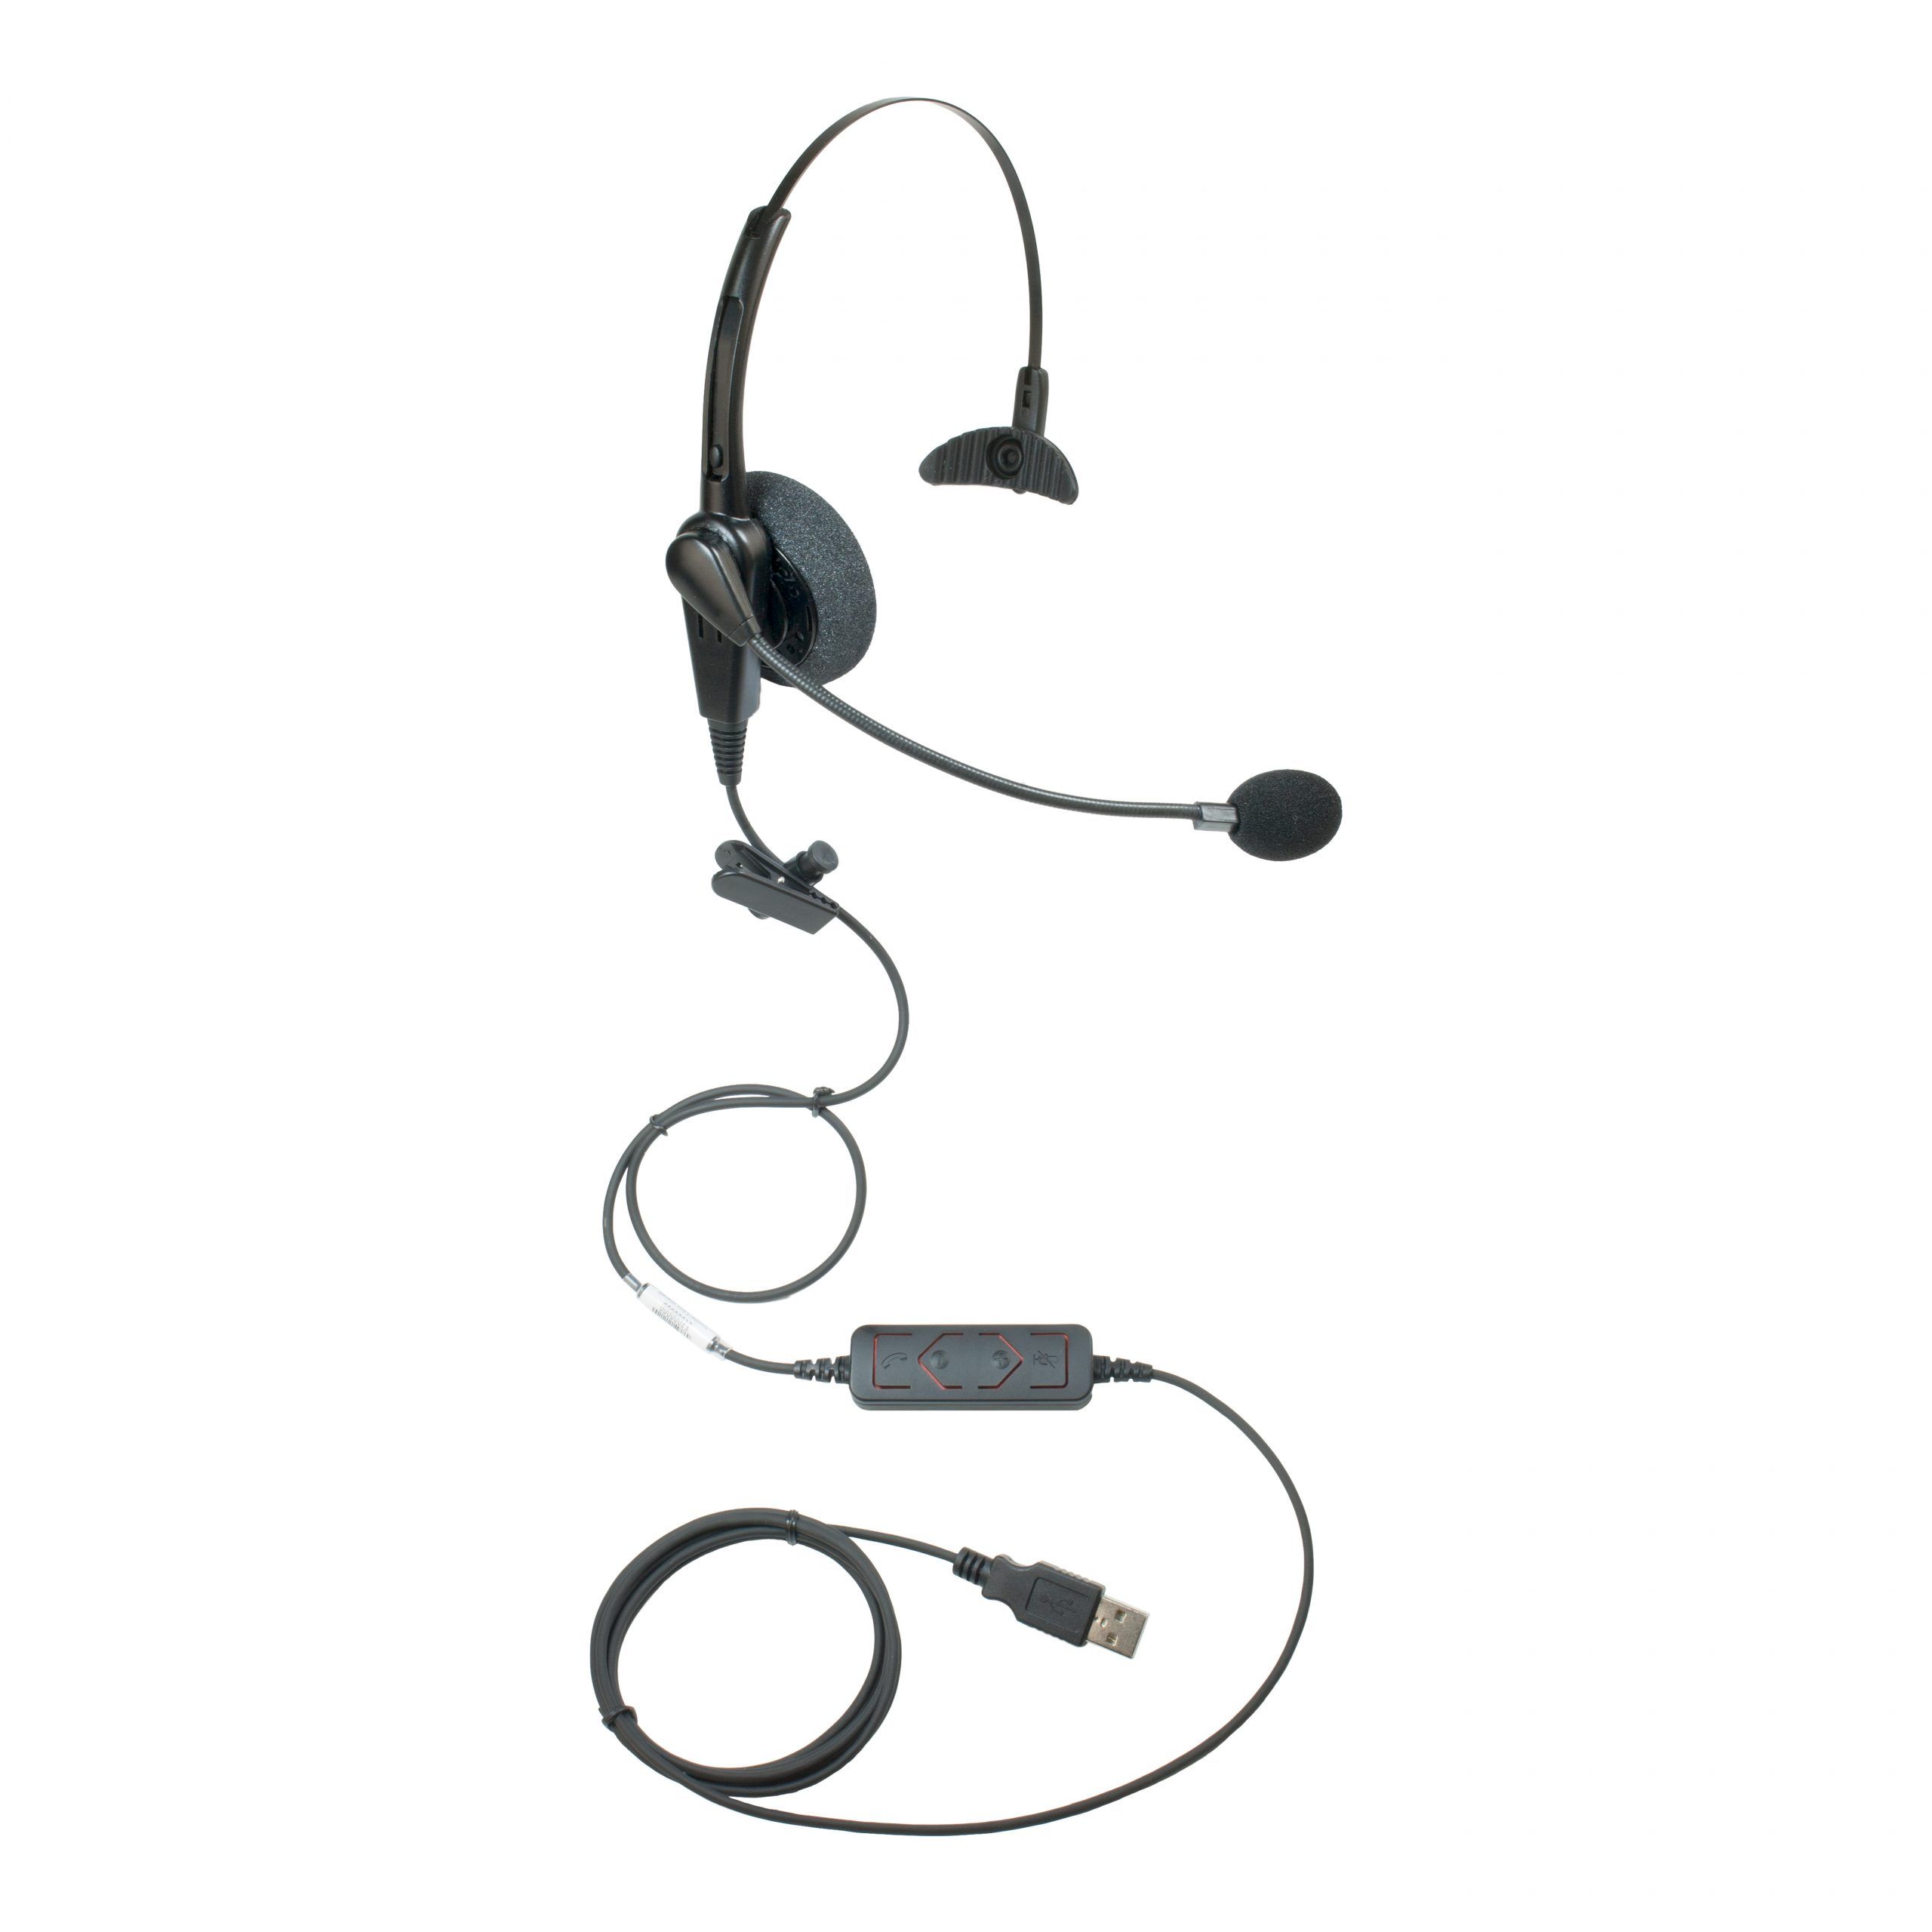 2133 commercial grade monaural usb headset w/ no quick disconnect p n 2133 usb 2 scaled